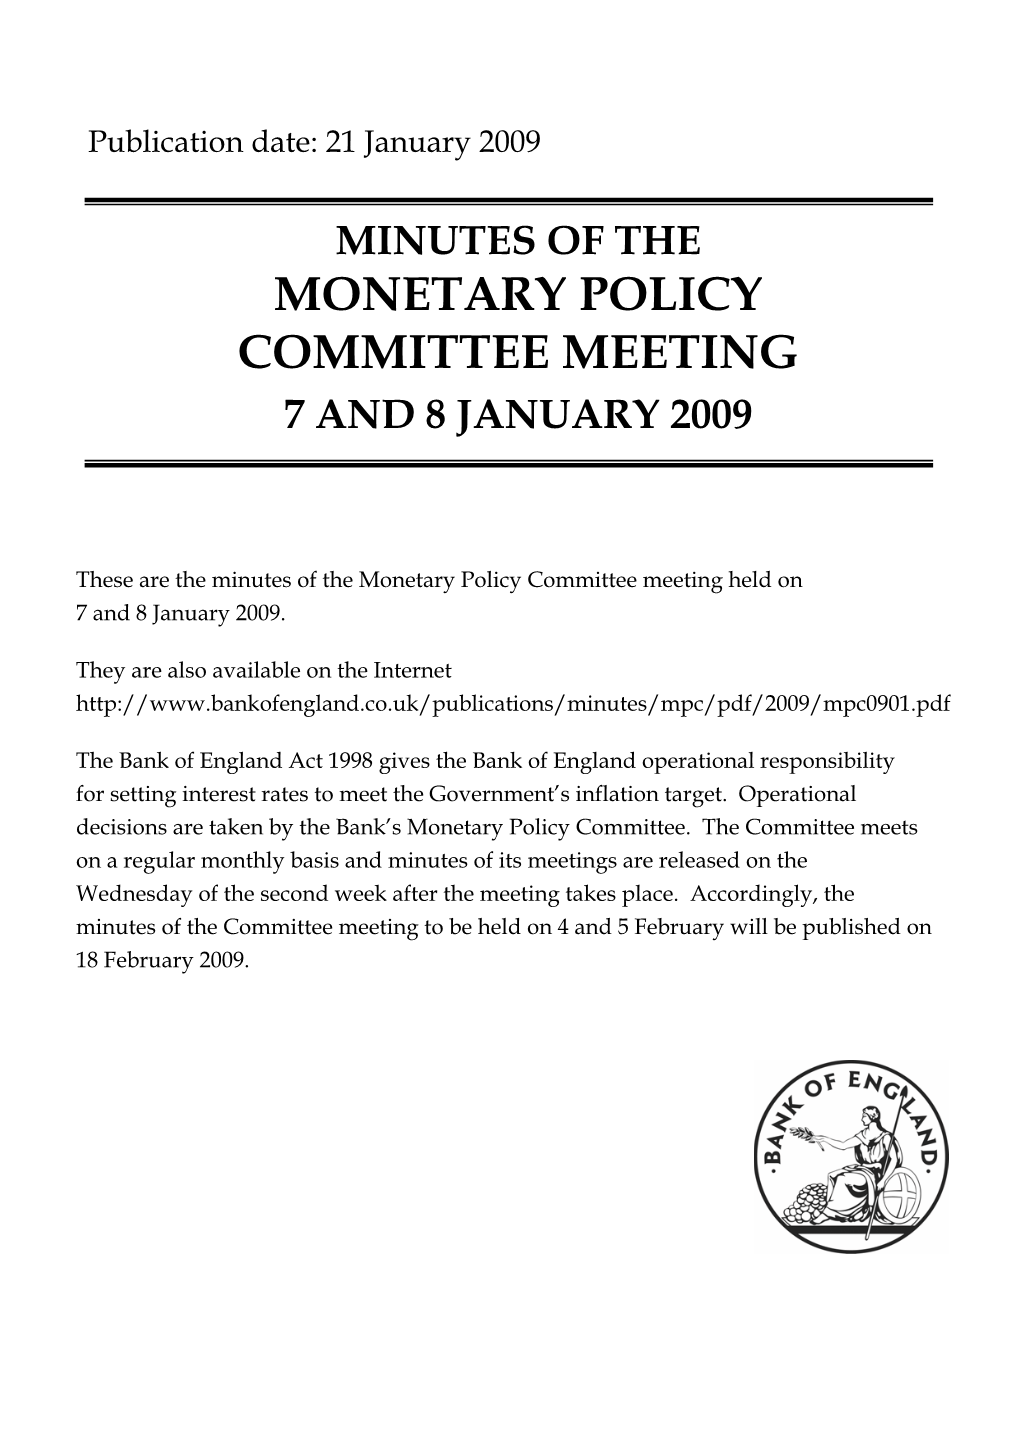 Minutes of the Monetary Policy Committee Meeting Held on 7 and 8 January 2009